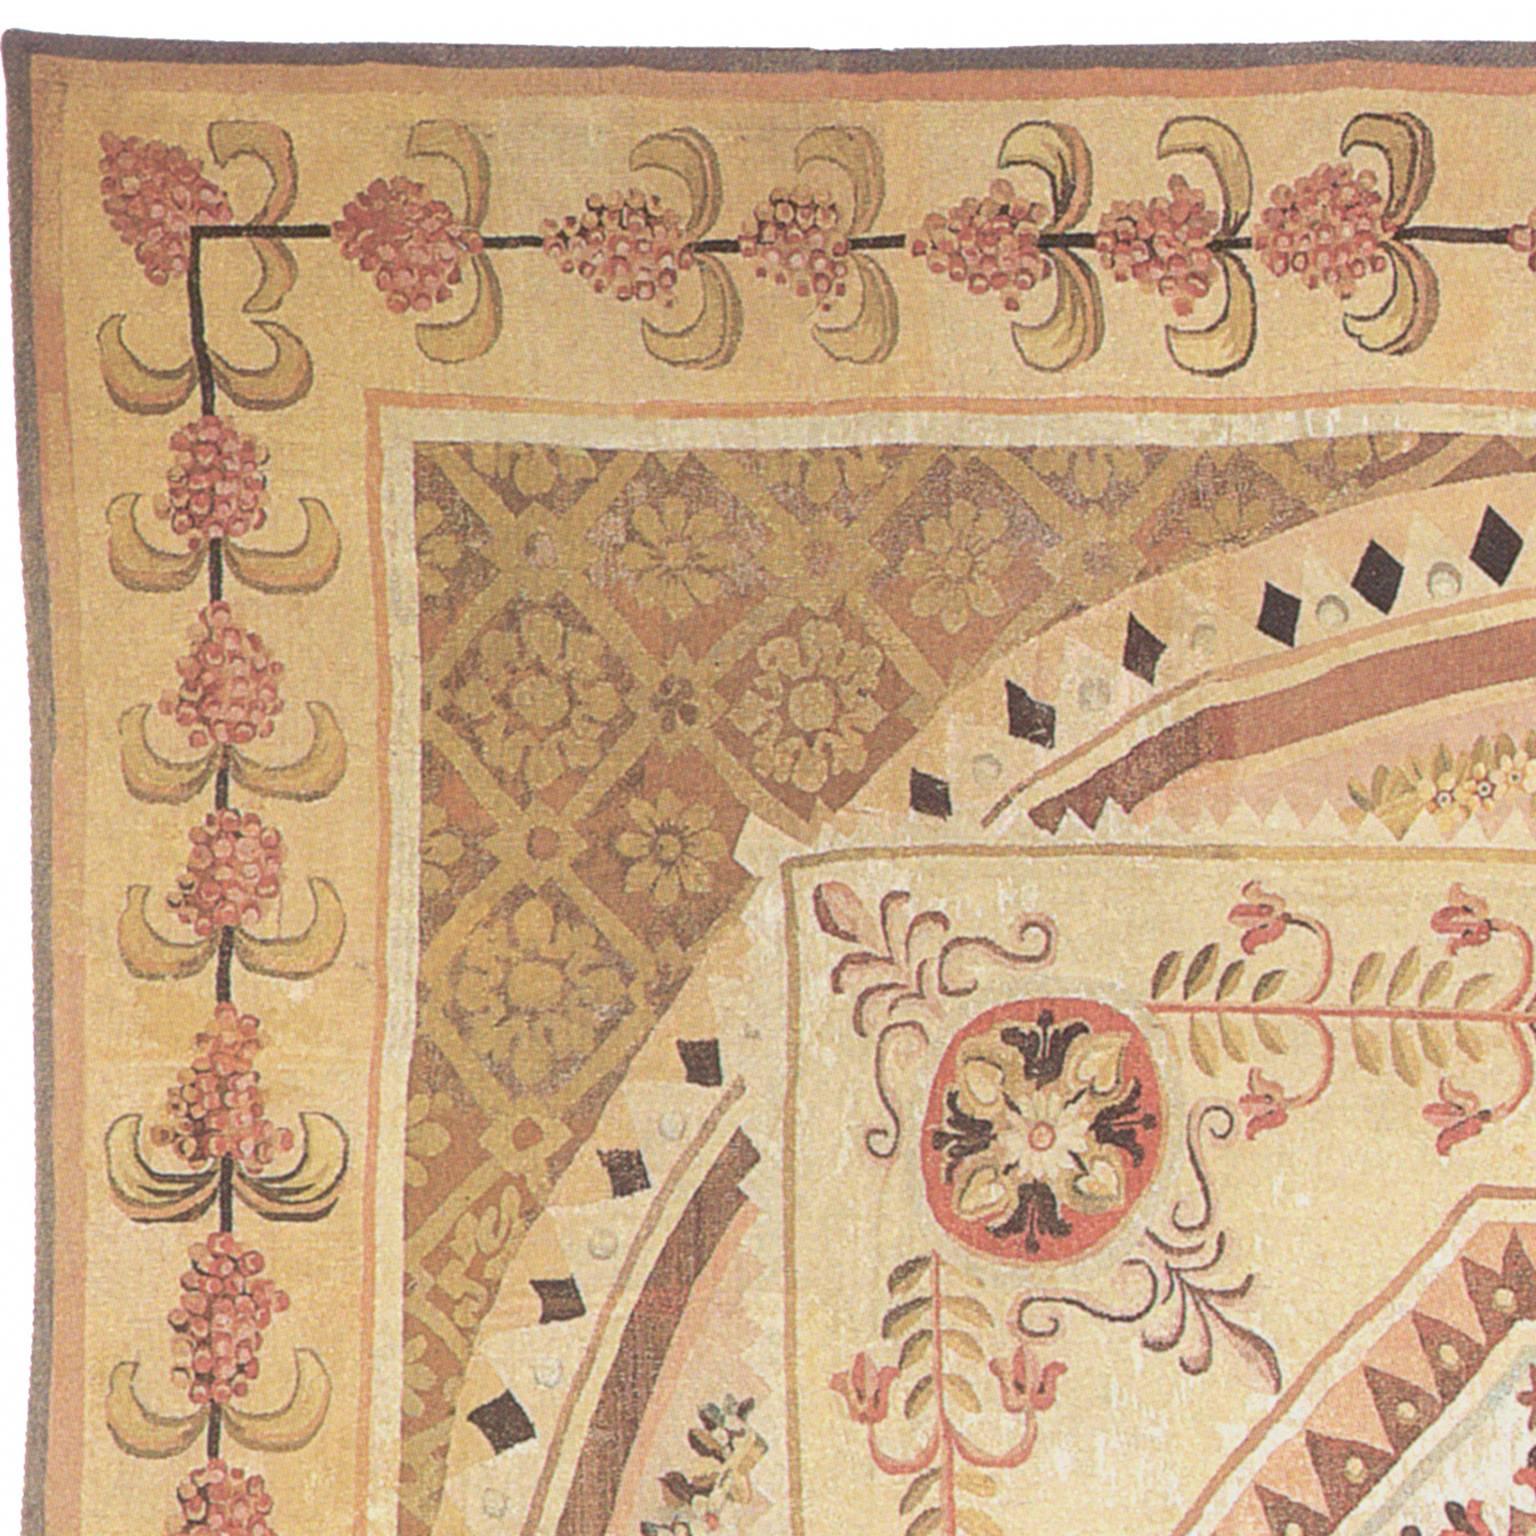 French Aubusson rug, 1800
France, circa 1800
Directoire Period
This carpet is characteristic of the Neoclassical style in vogue at the end of the 18th and beginning of the 19th centuries.